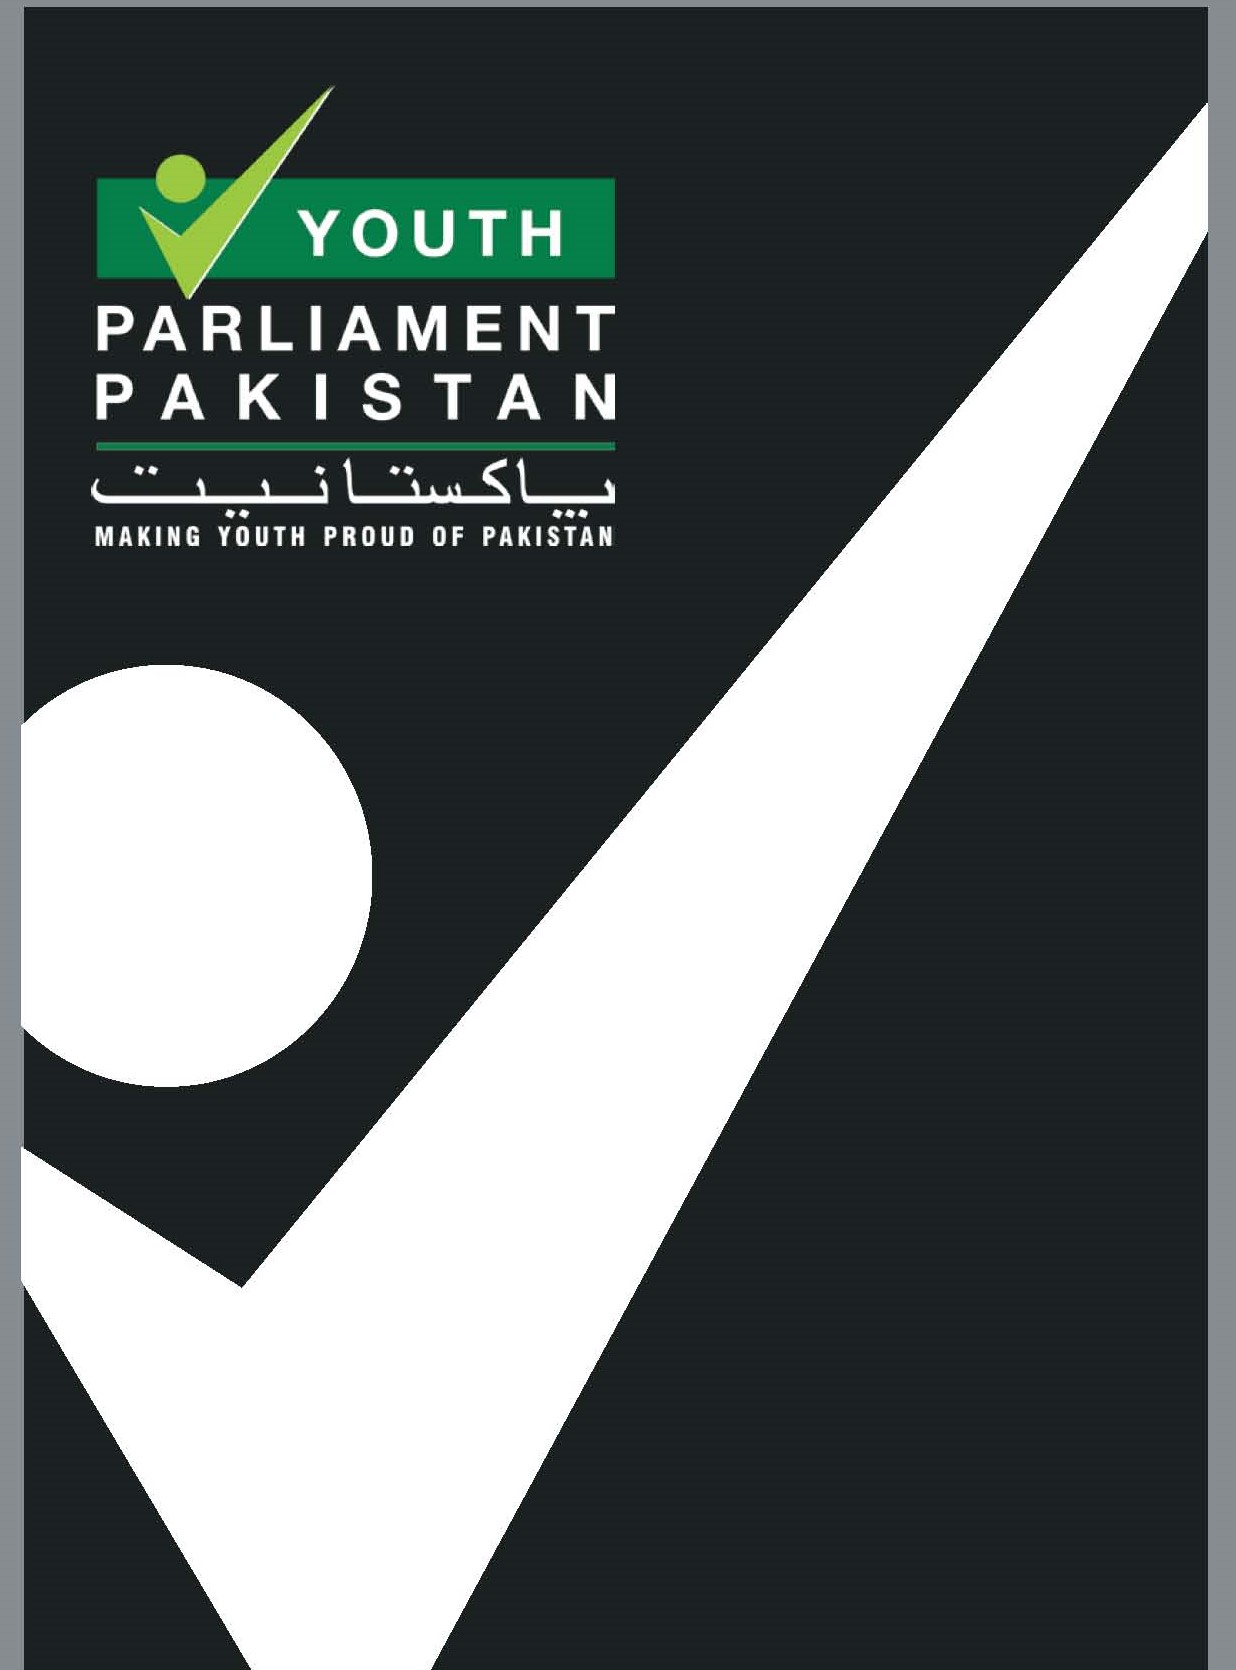 YOUTH PARLIMENT PAKISTAN